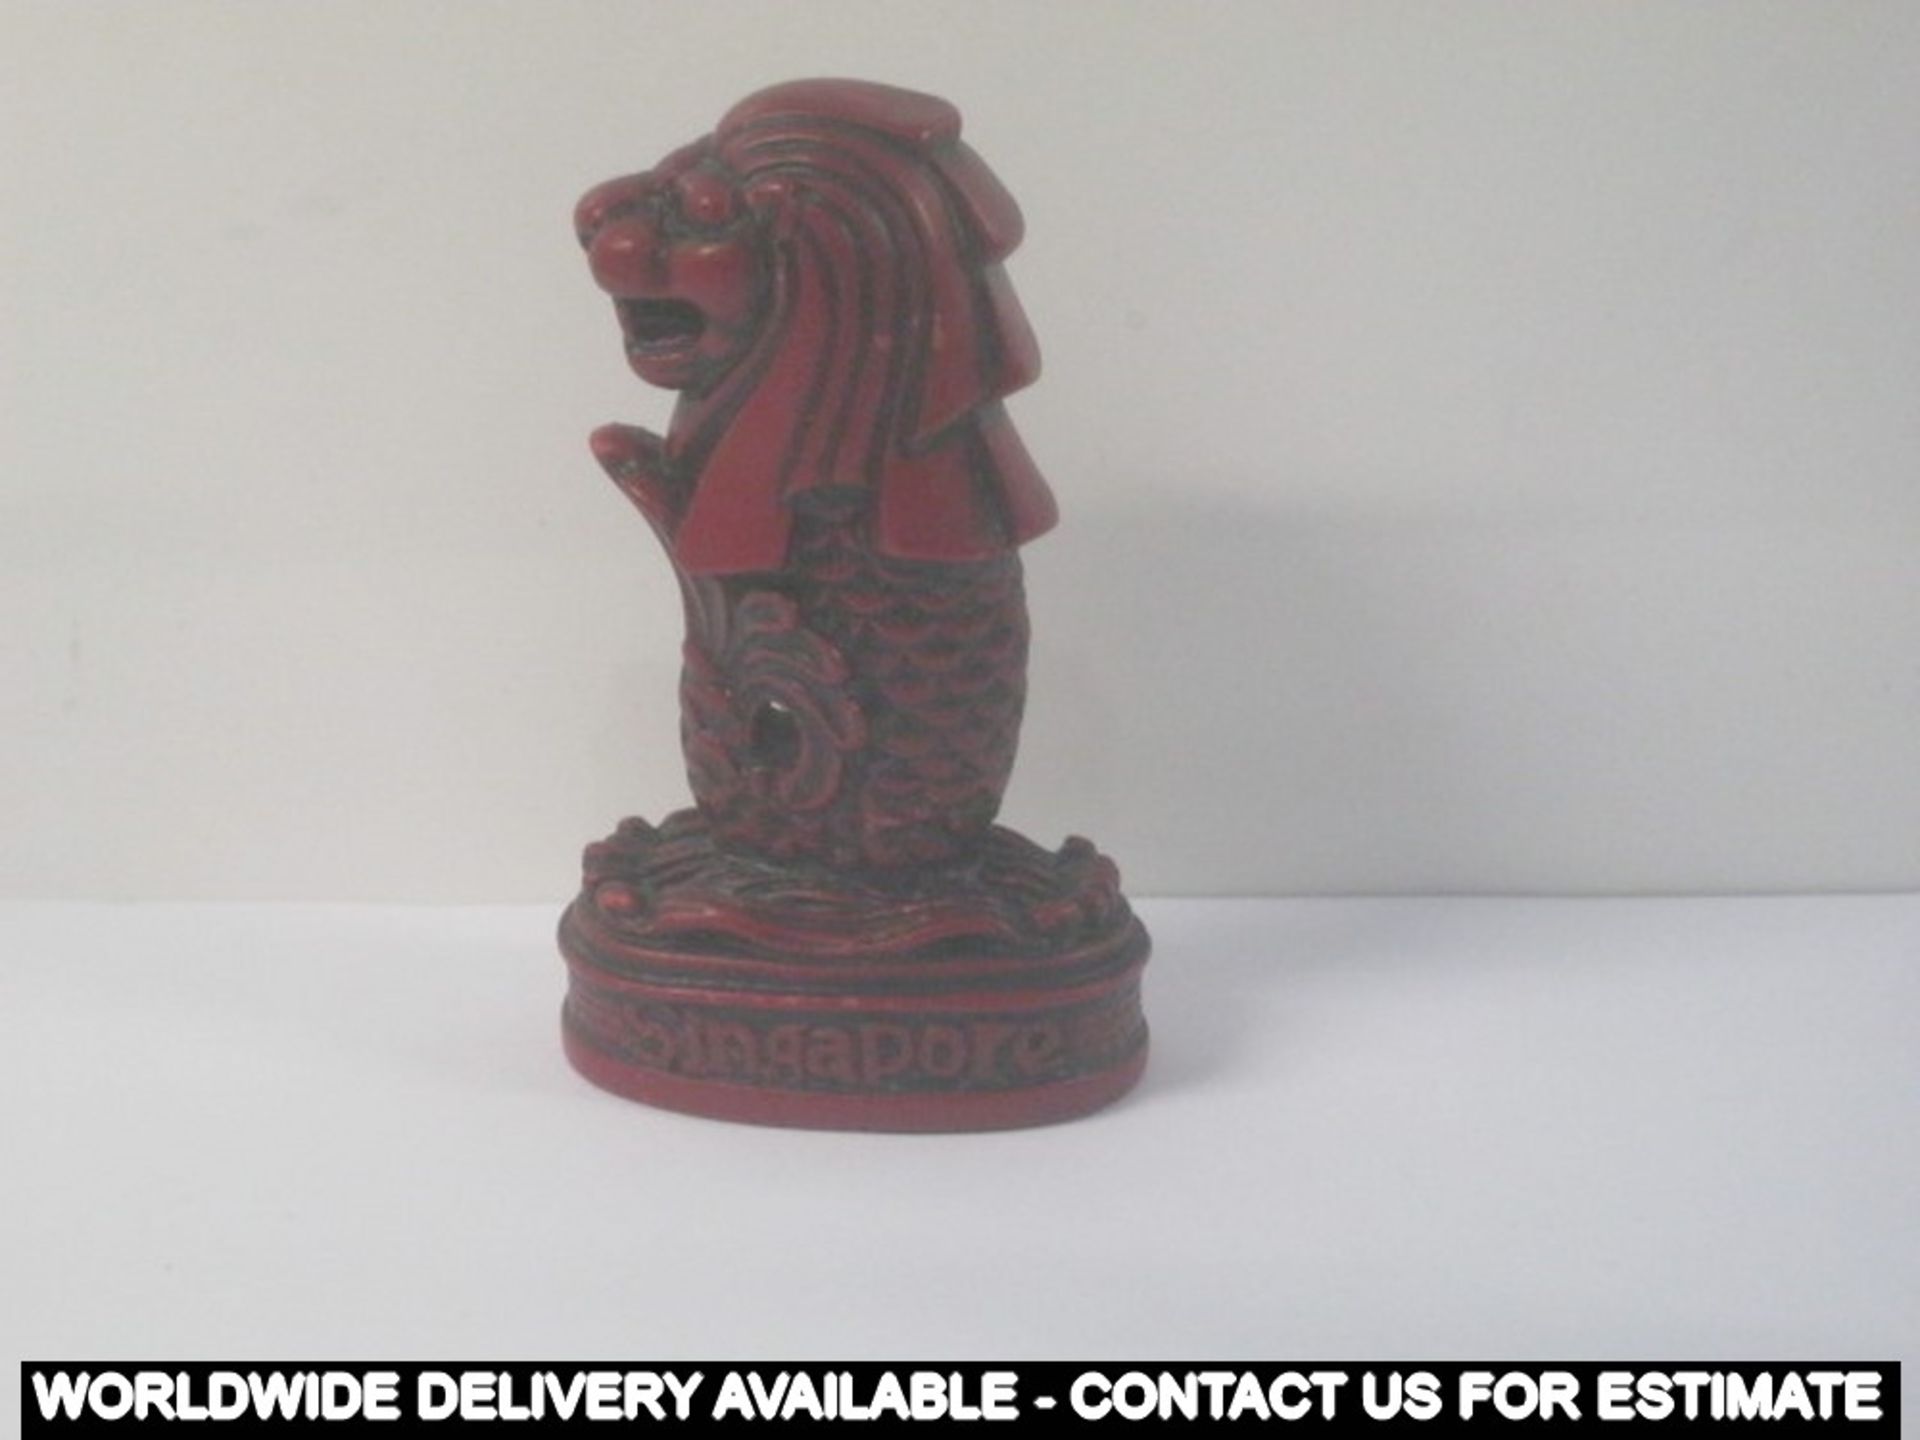 2 x red resin dragons - one marked SINGAPORE and MERLION - Image 2 of 5